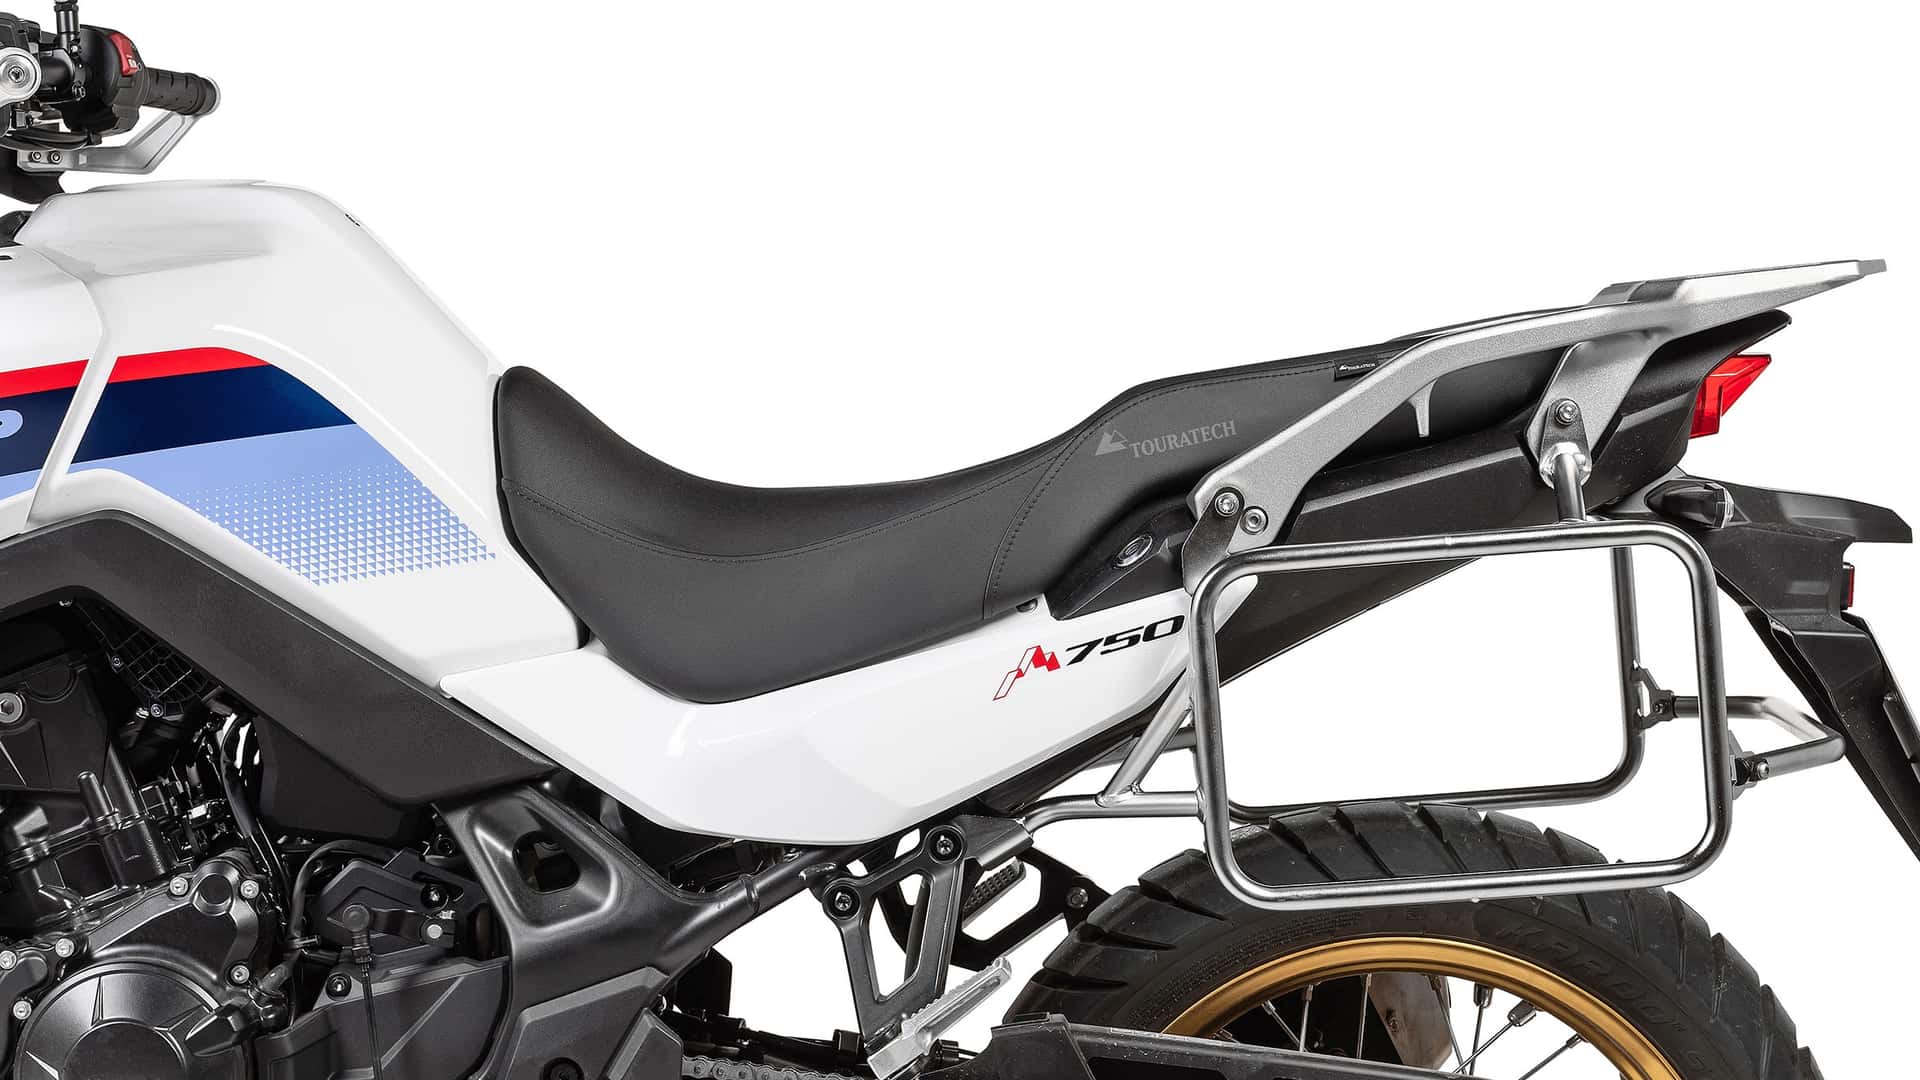 touratech’s honda xl750 transalp comfort seat will see you go that extra mile